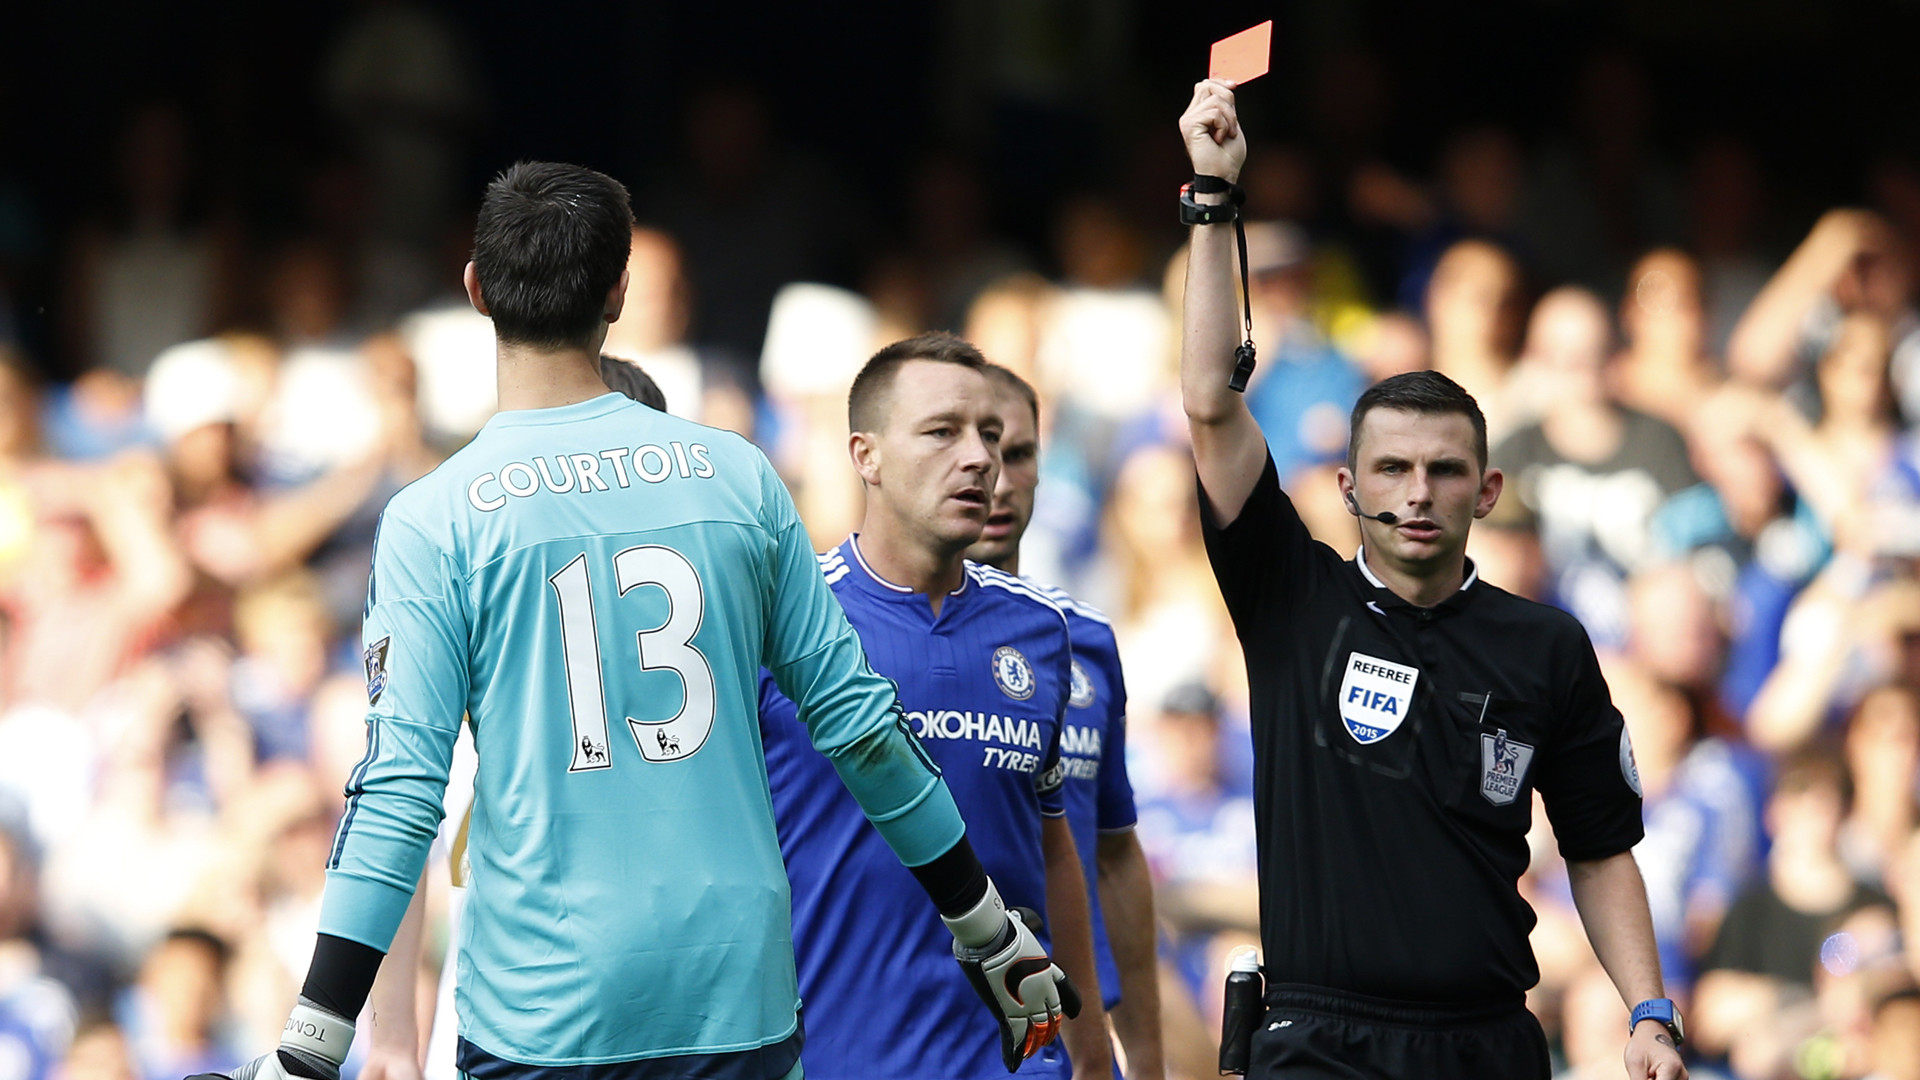 1920x1080 Chelsea's appeal of Thibaut Courtois red card against Swansea rejected by FA